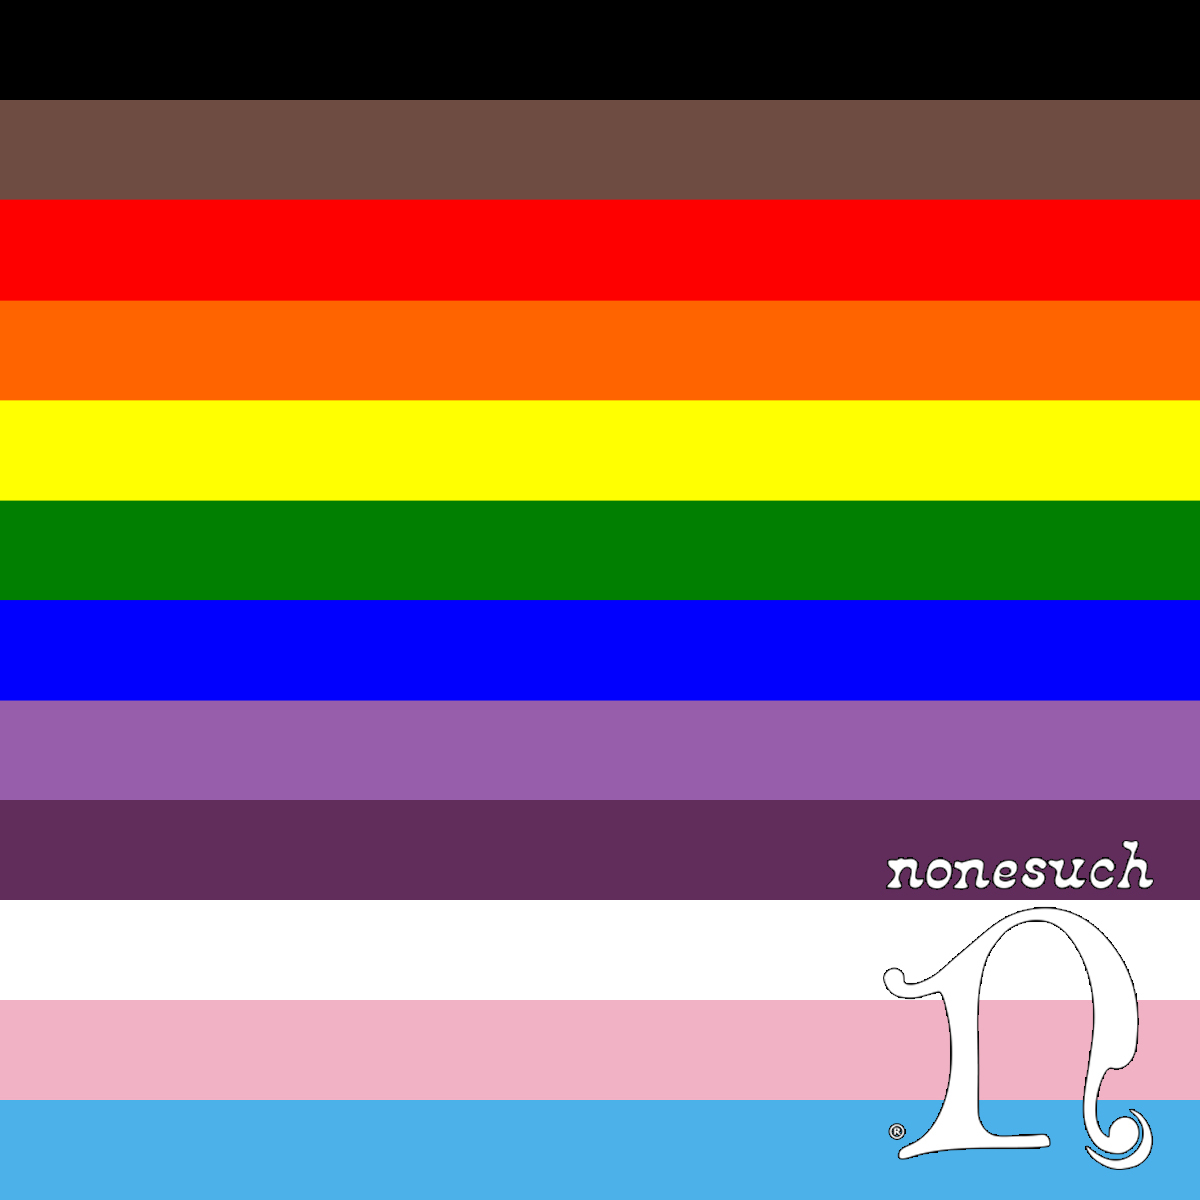 Happy Pride! We're celebrating with our newly updated playlist of recent and classic Nonesuch recordings by LGBTQ+ composers, performers, and allies like @kdlang, @TheMagFields, @caroshawmusic, @HFTRR, @jeremydenk, @Thomas_ades, @nicomuhly & more.

🔊 nonesuch.lnk.to/pride